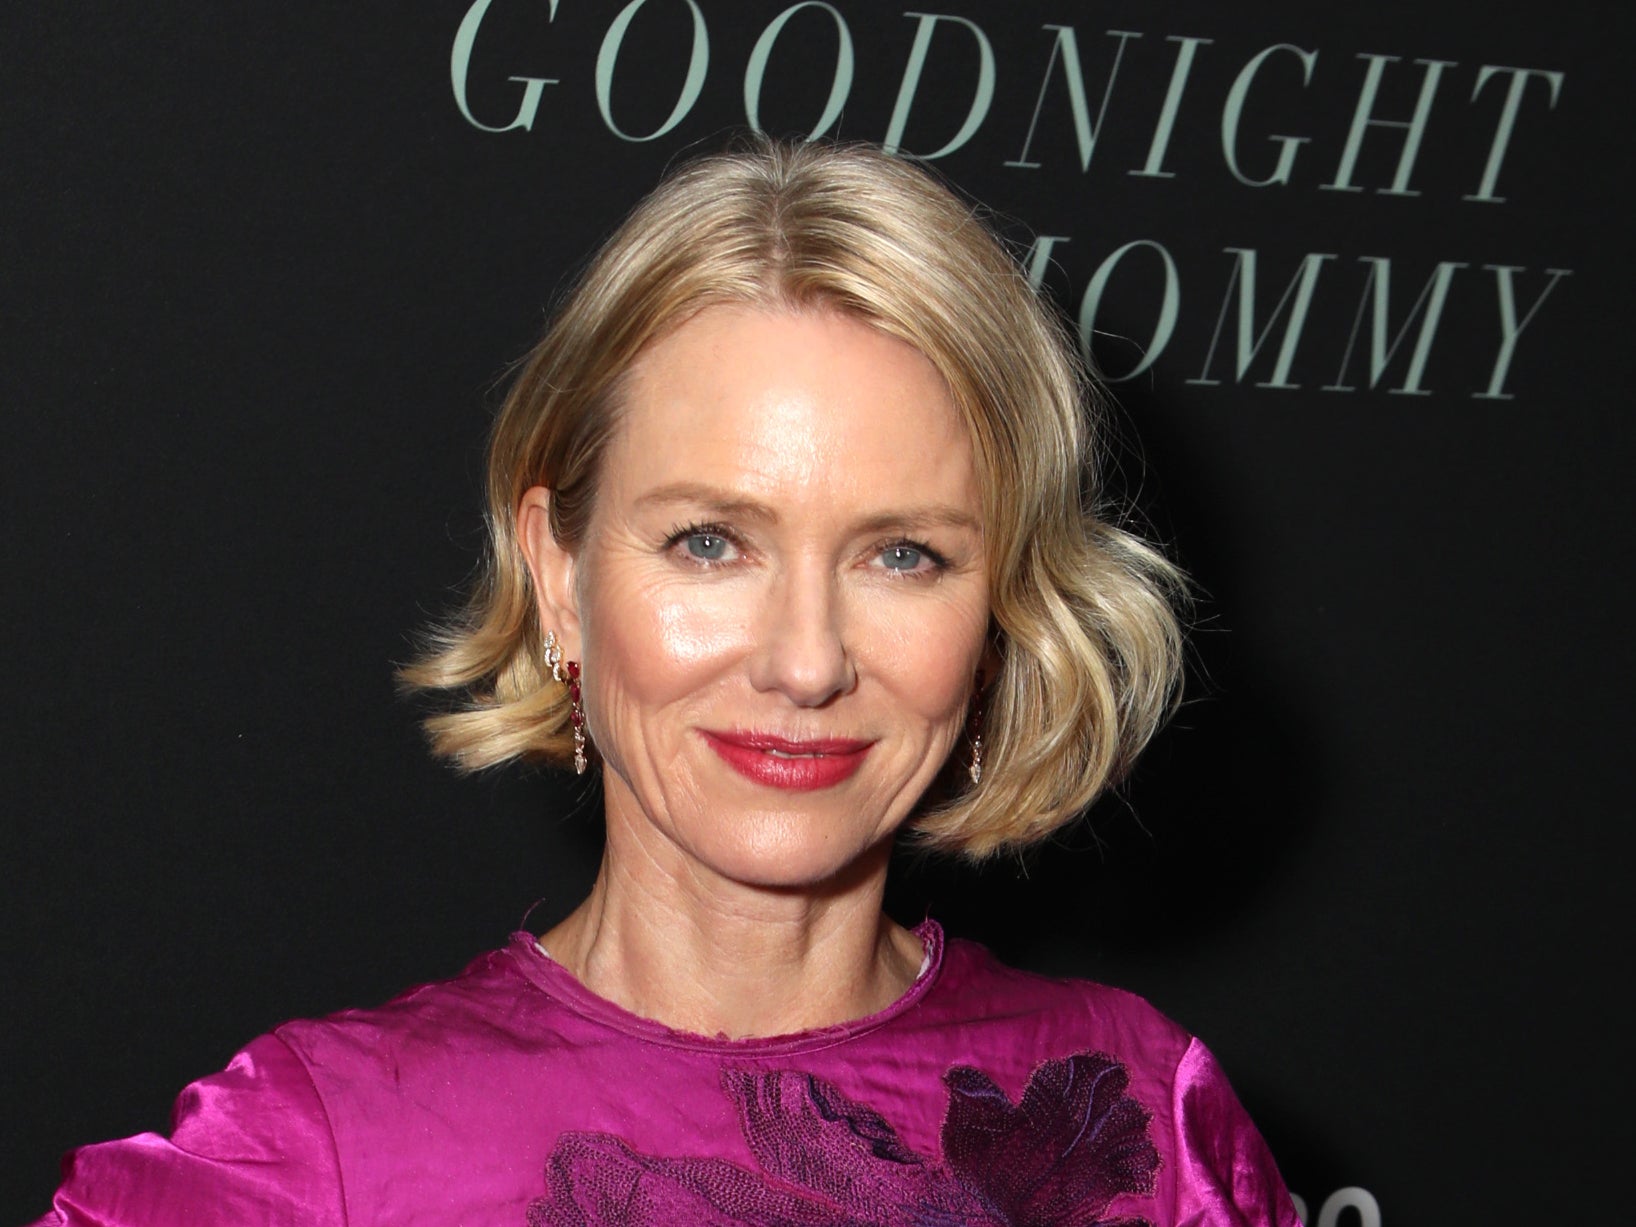 Naomi Watts said she panicked about her career